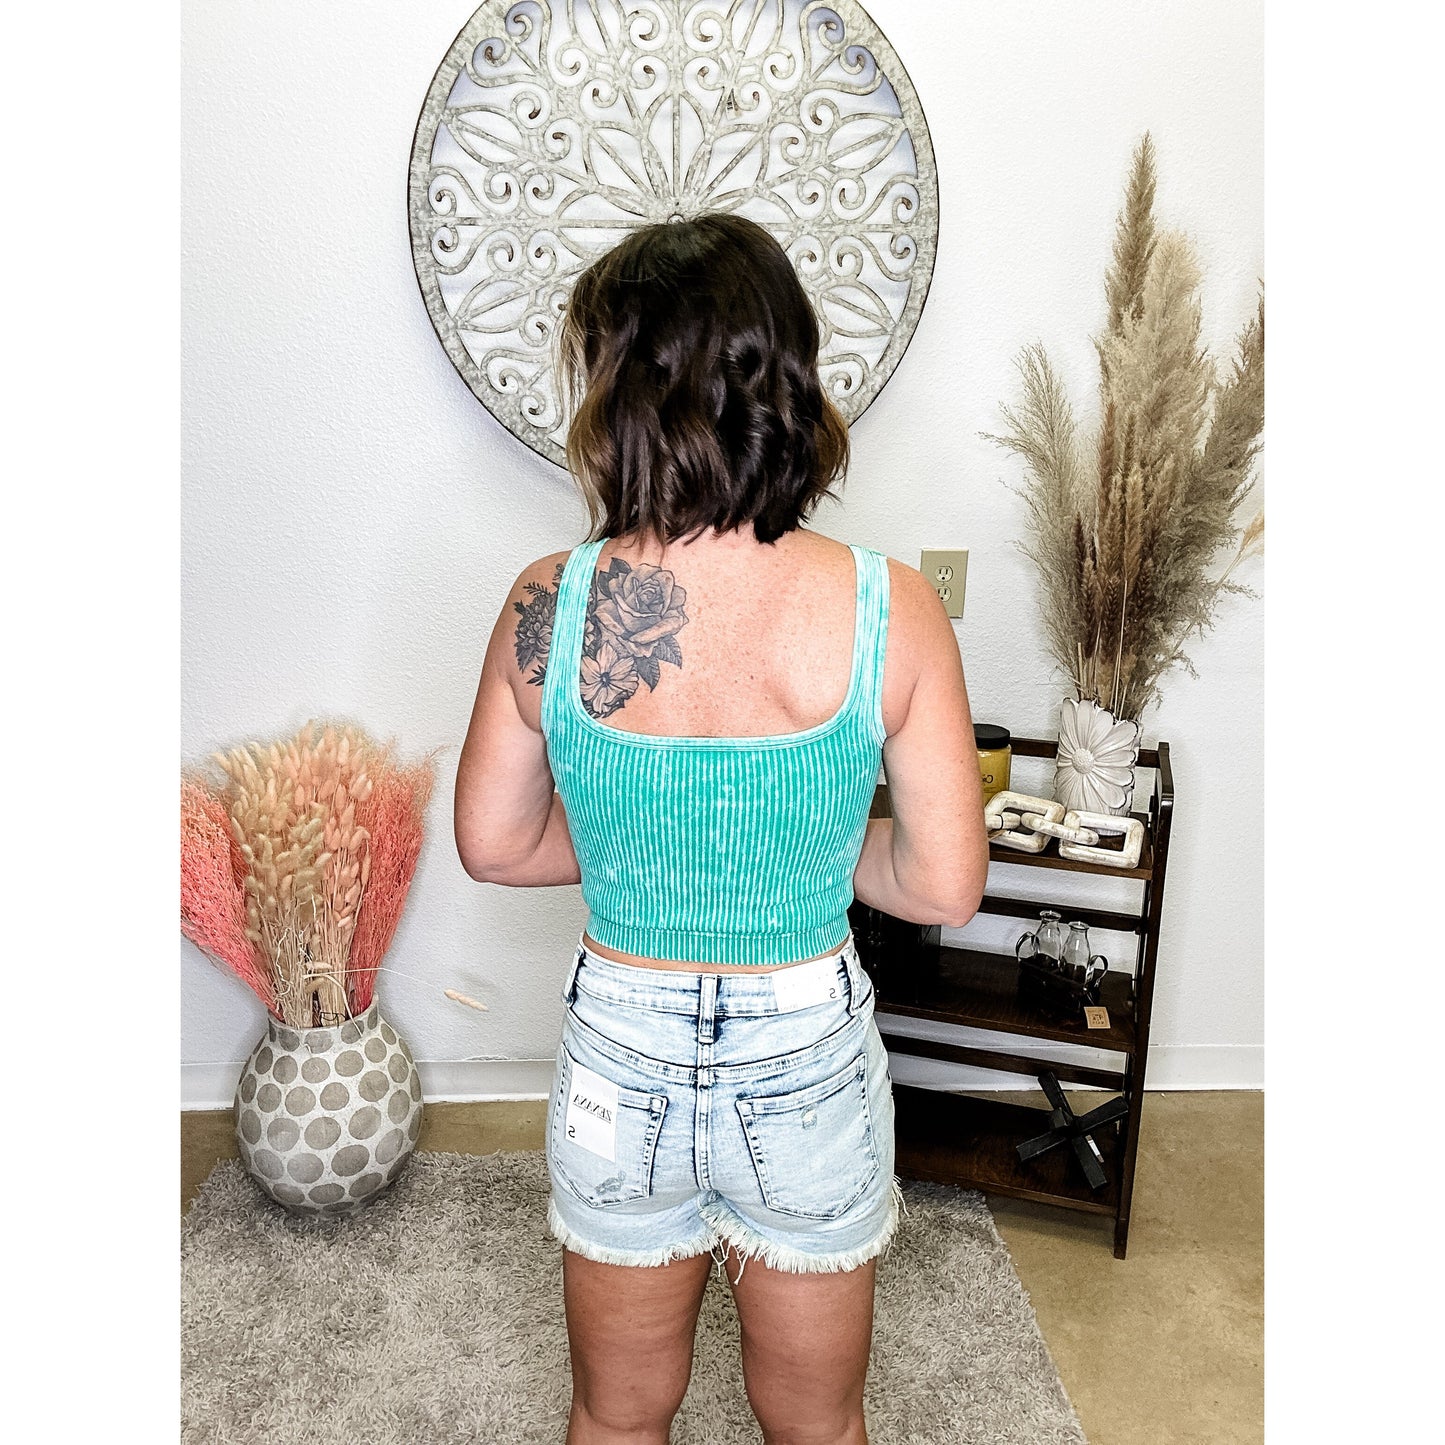 Green Cropped Tank Top